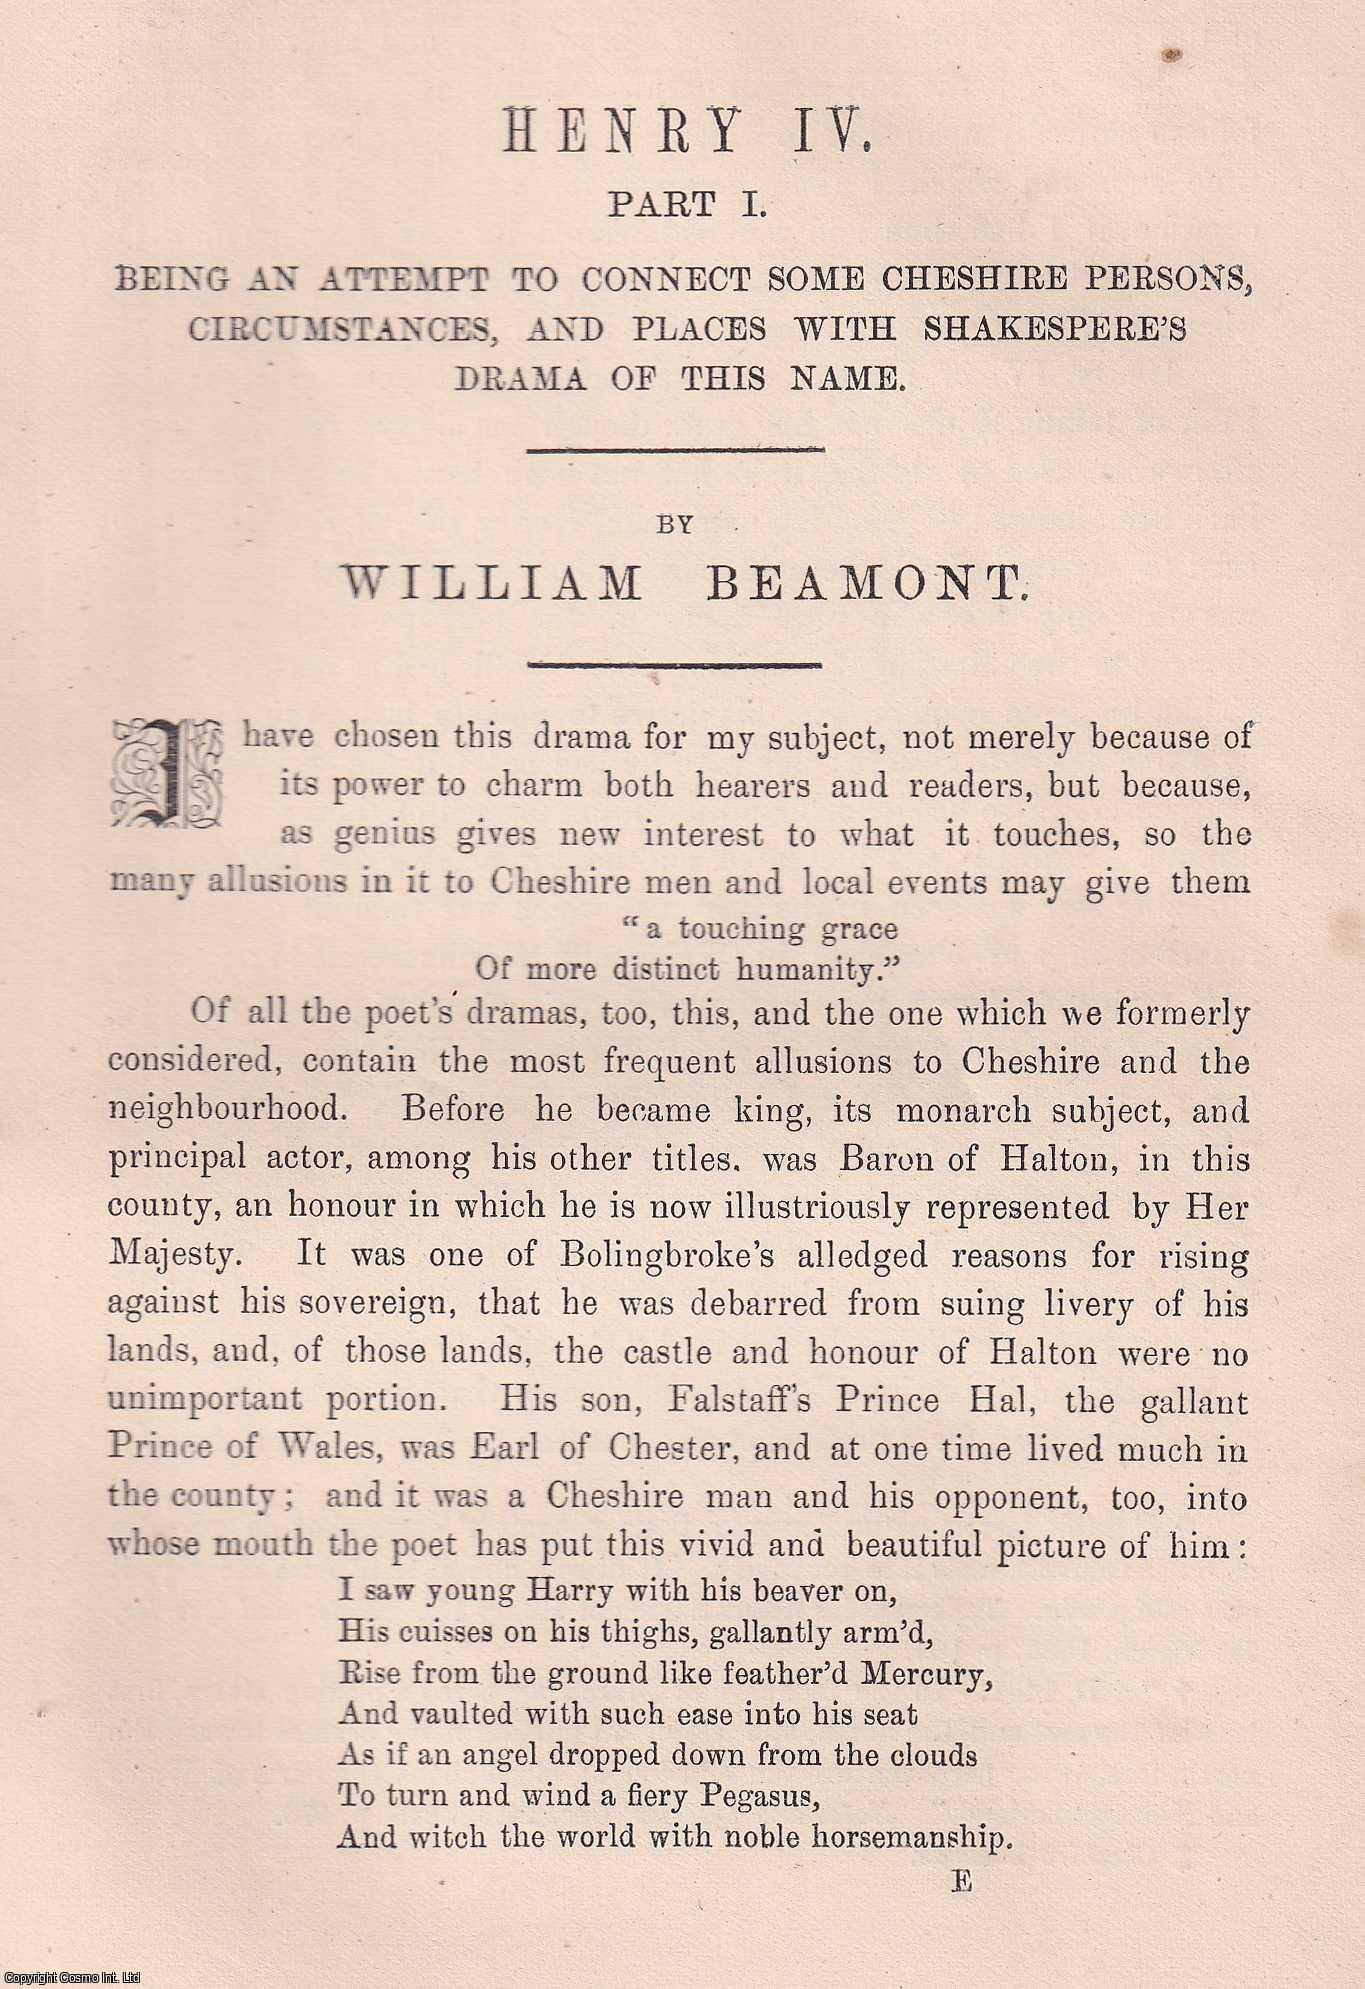 William Beamont - Henry IV, Part I & Part II. Being an Attempt to Connect some Cheshire Persons, Circumstances, and Places with Shakespeare's Drama of this name. An original article from the Journal of the Architectural, Archaeological, and Historic Society of Chester, 1885.